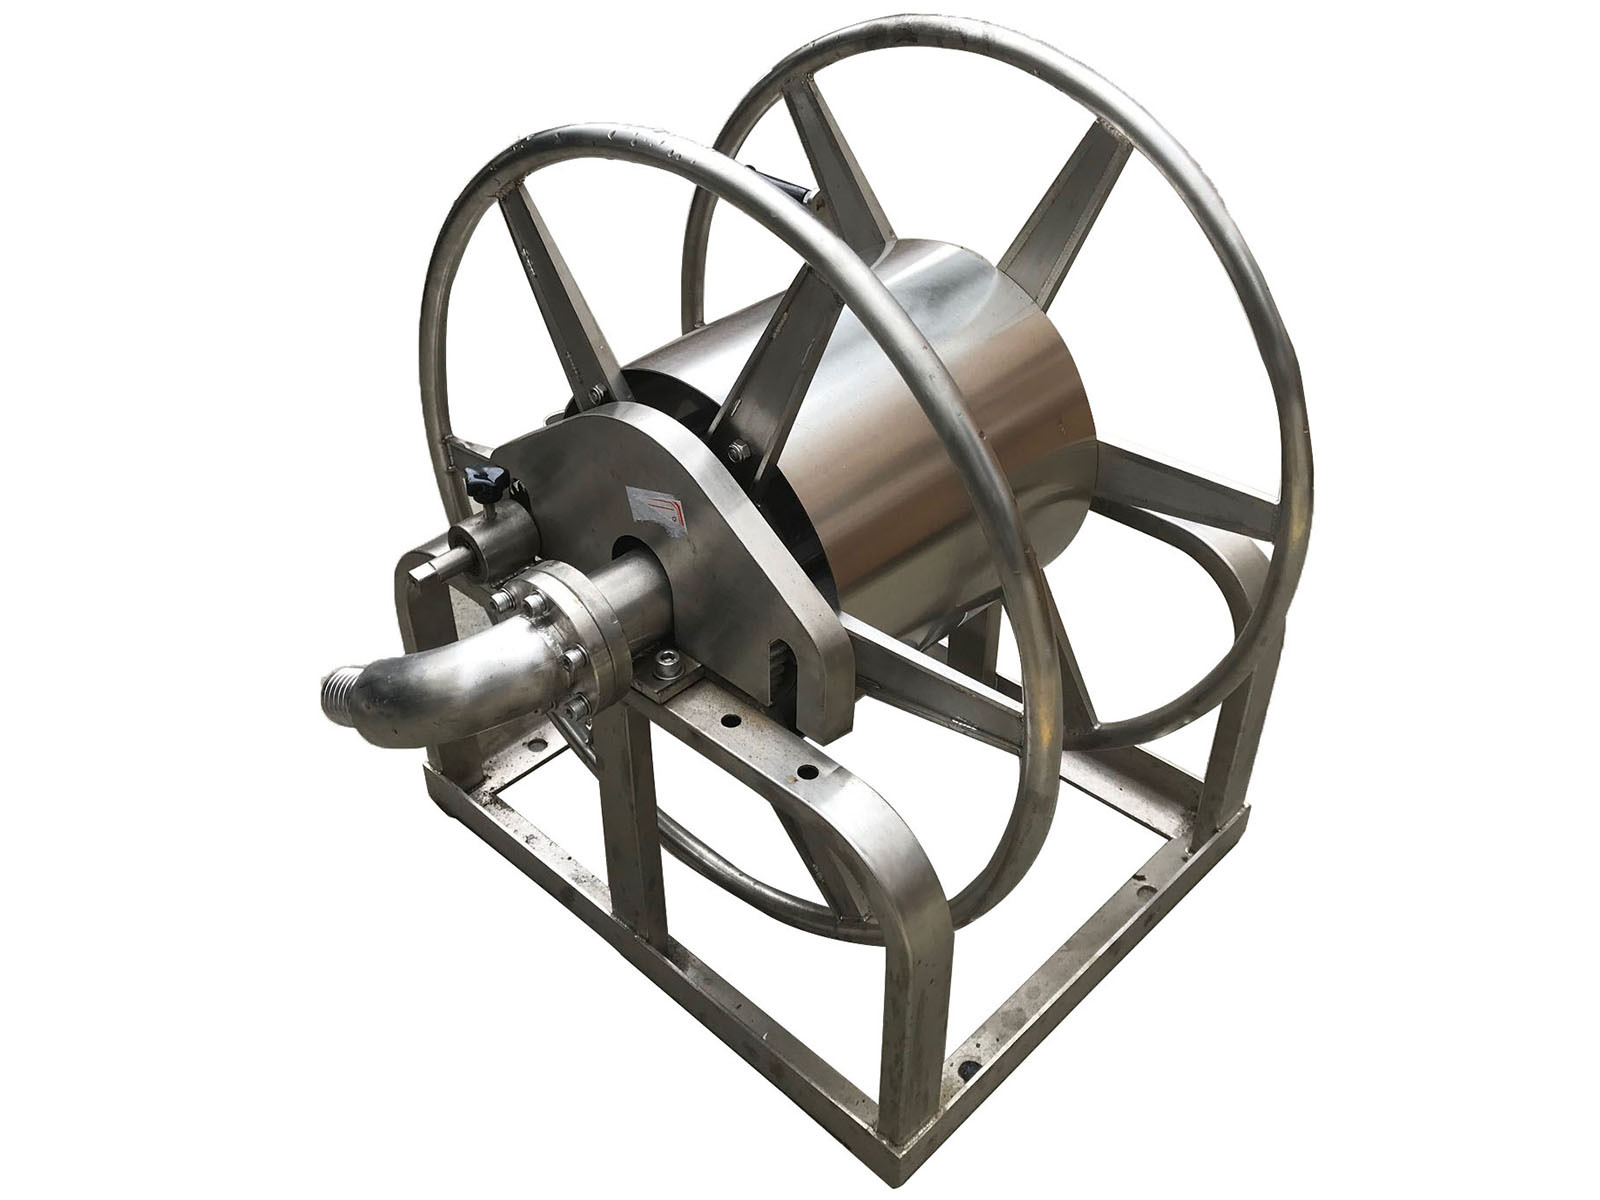 Small WT Stainless steel hose reel 1.5inch hose